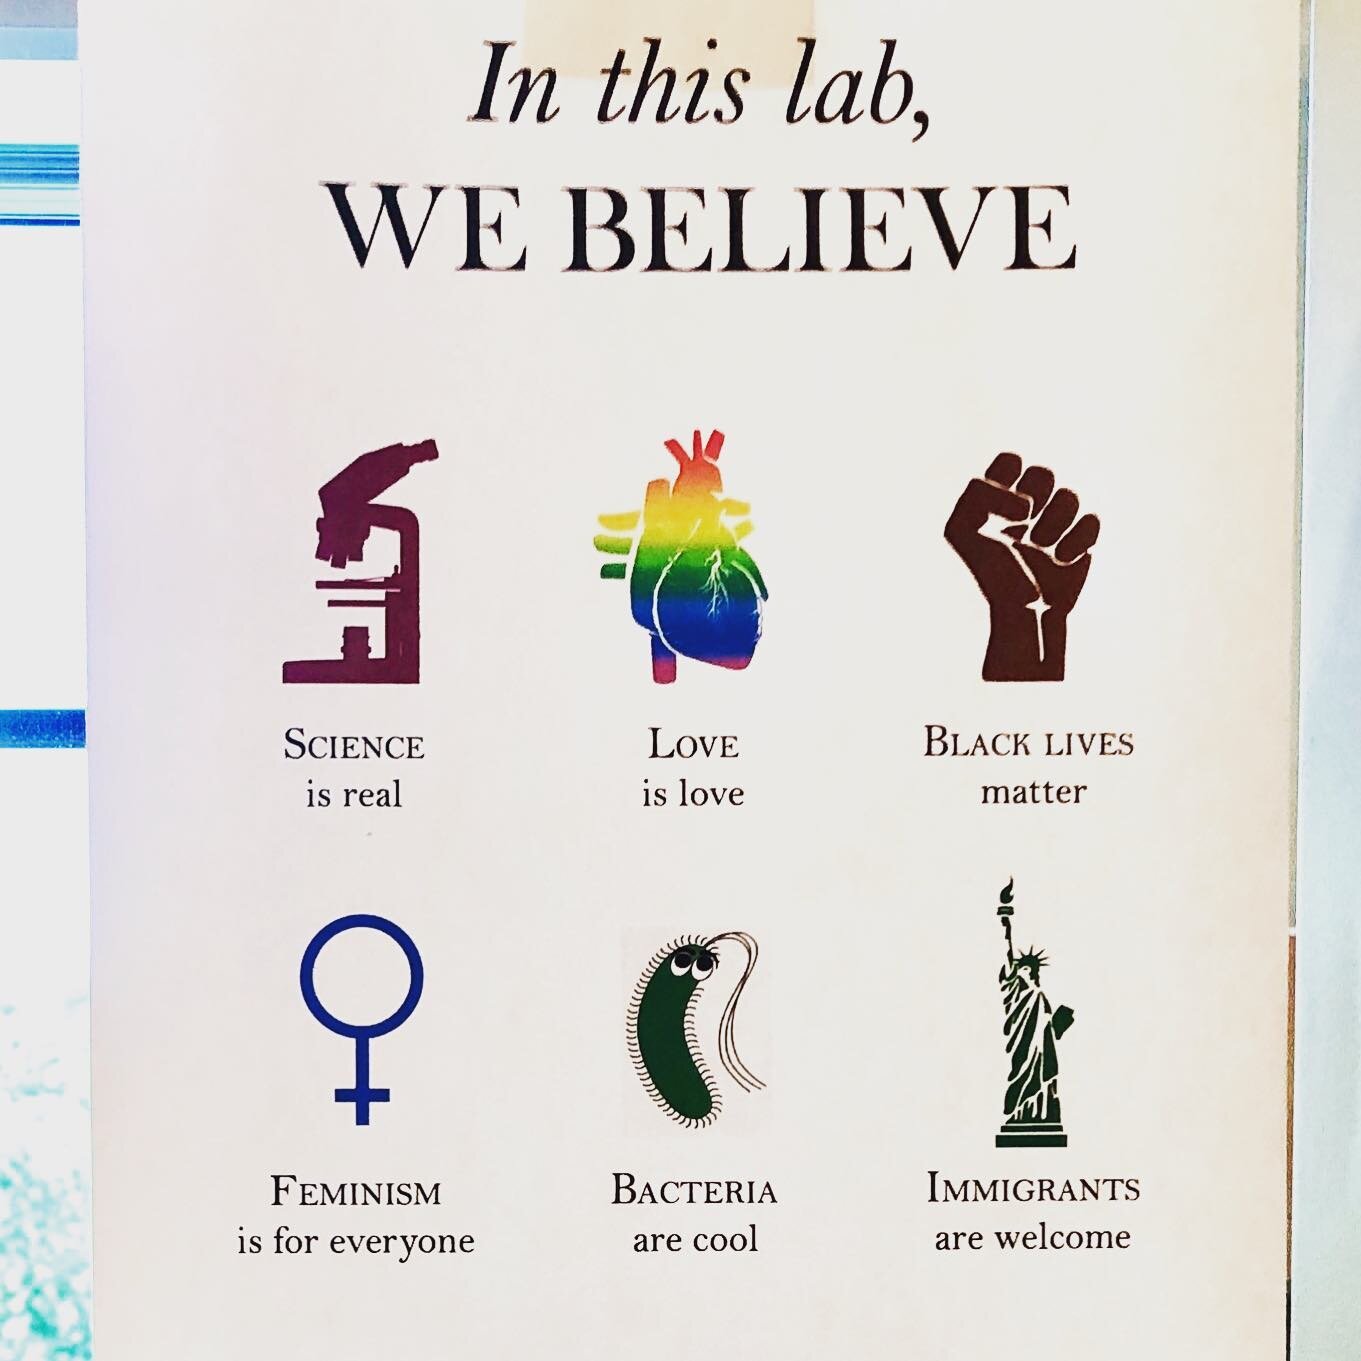 Loving our new sign. Check out https://sammykatta.com/diversity and print one for your lab too!